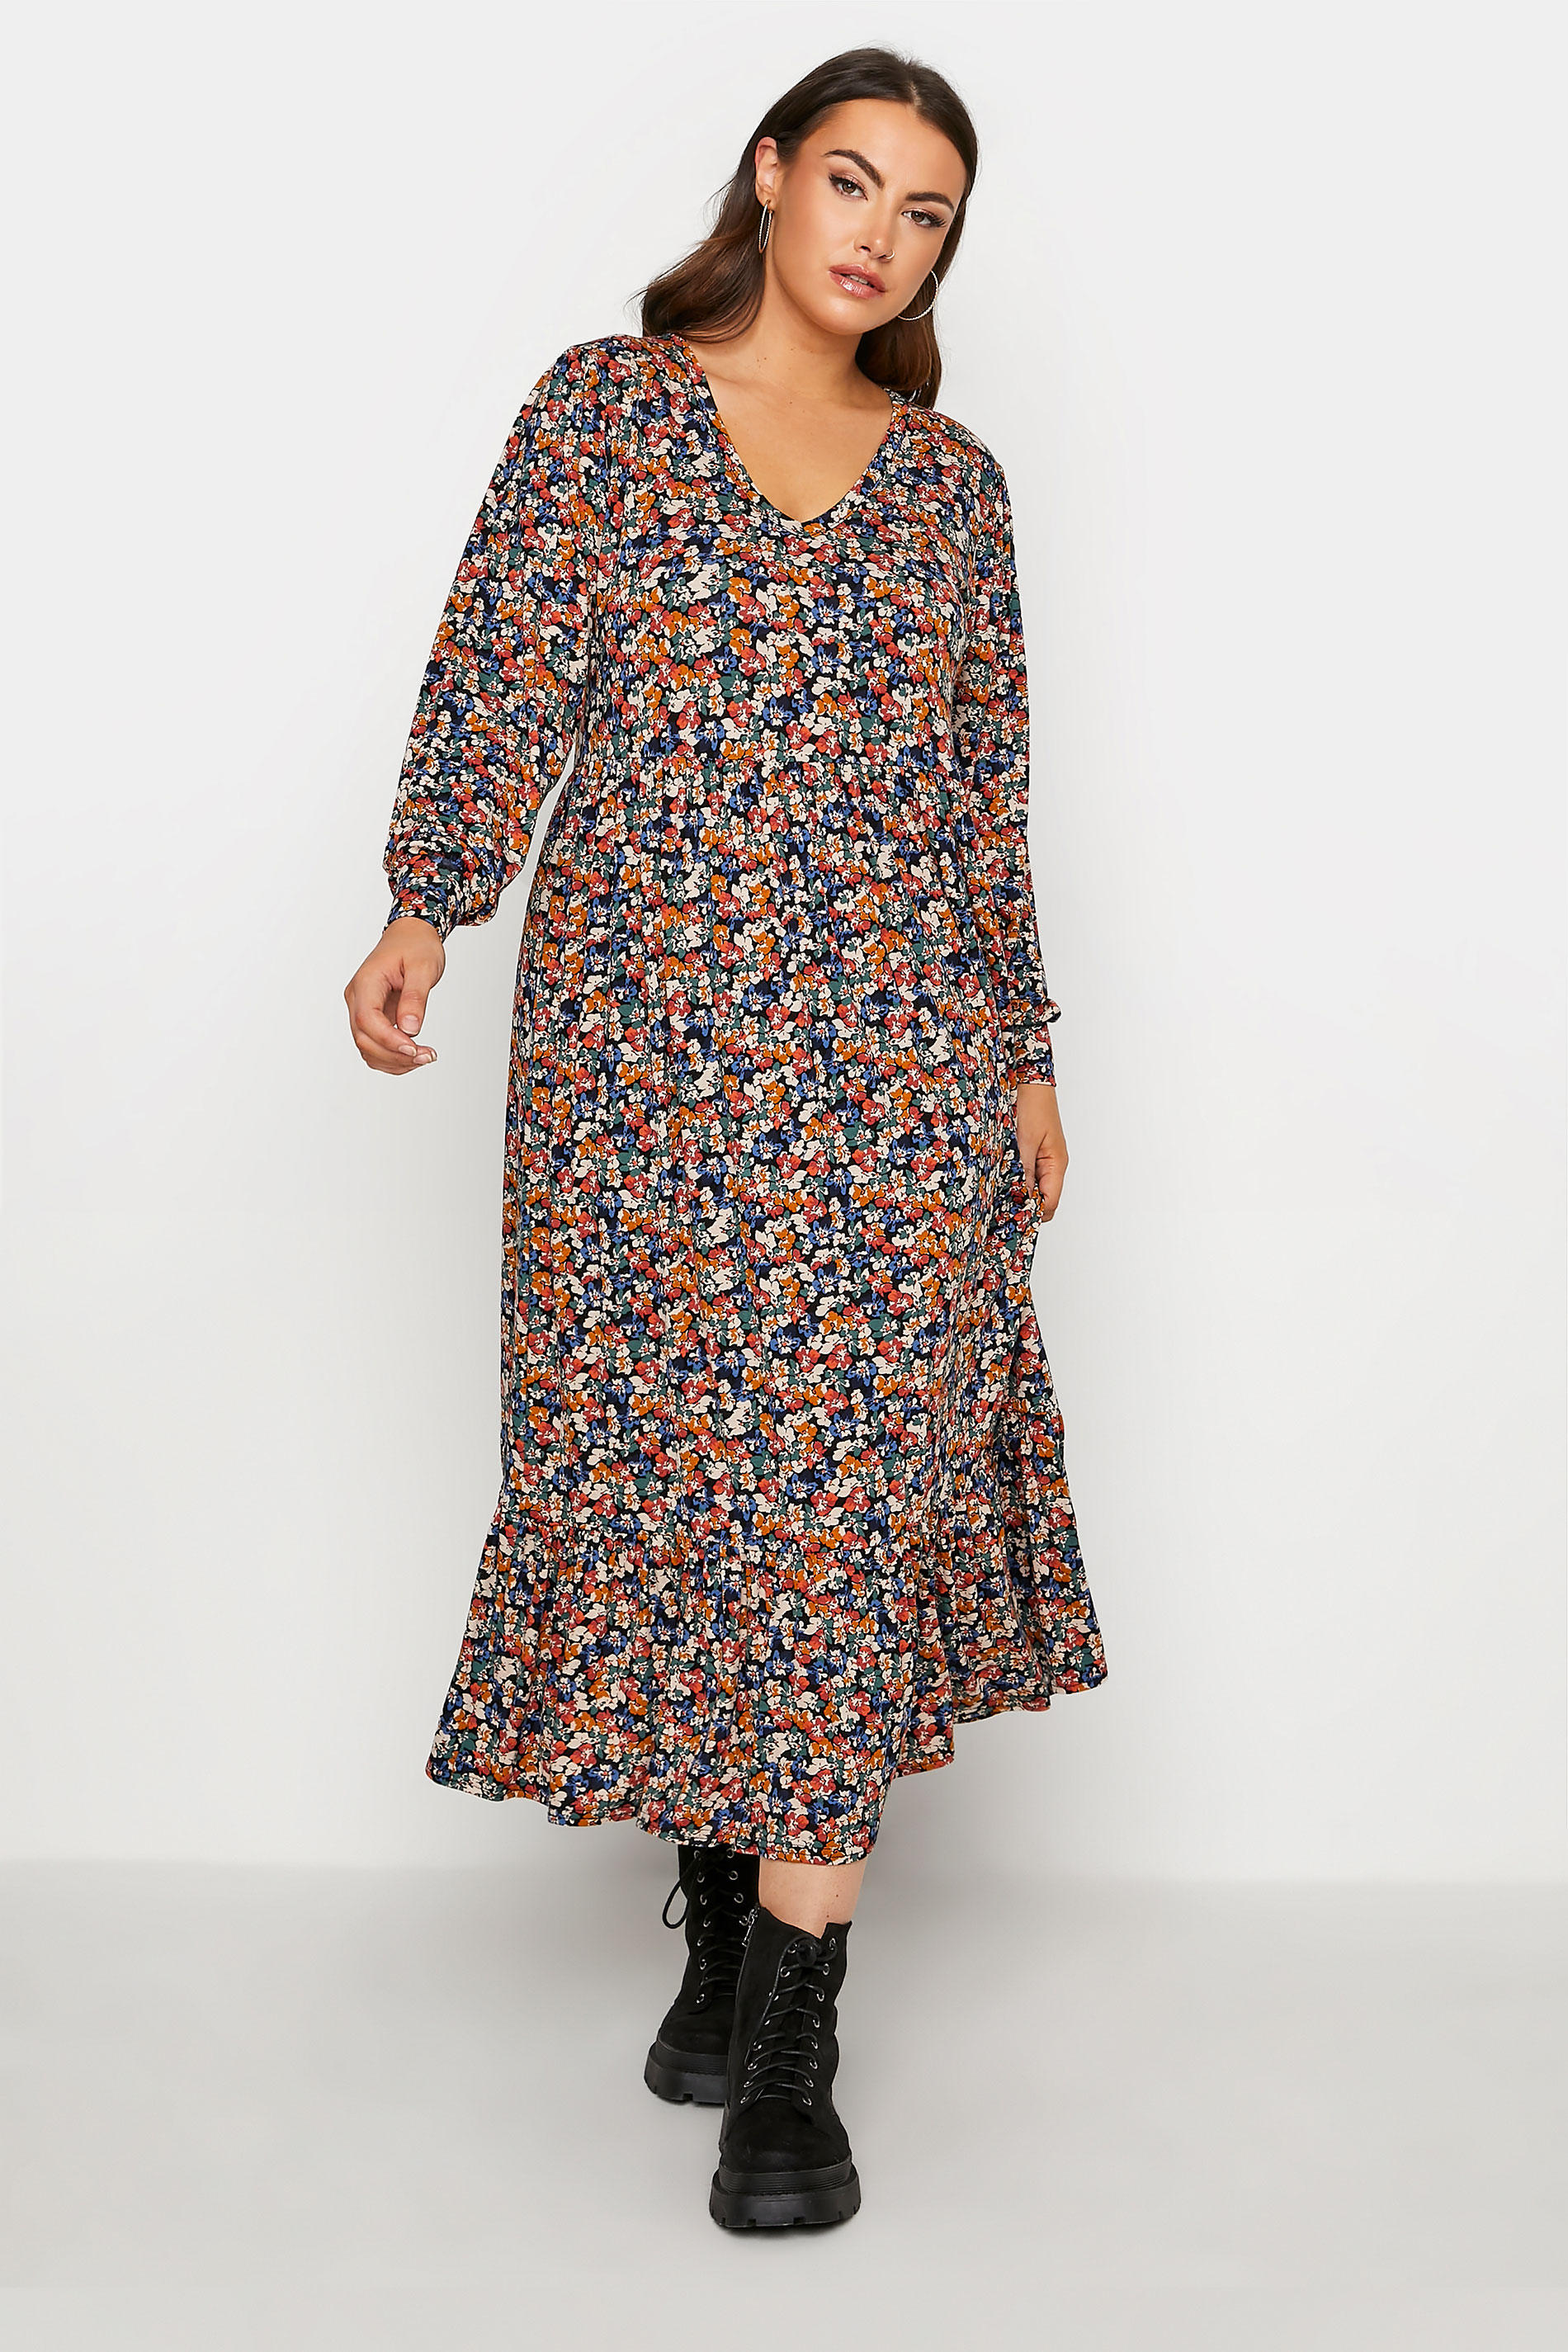 LIMITED COLLECTION Black Floral Print Smock Maxi Dress_A.jpg